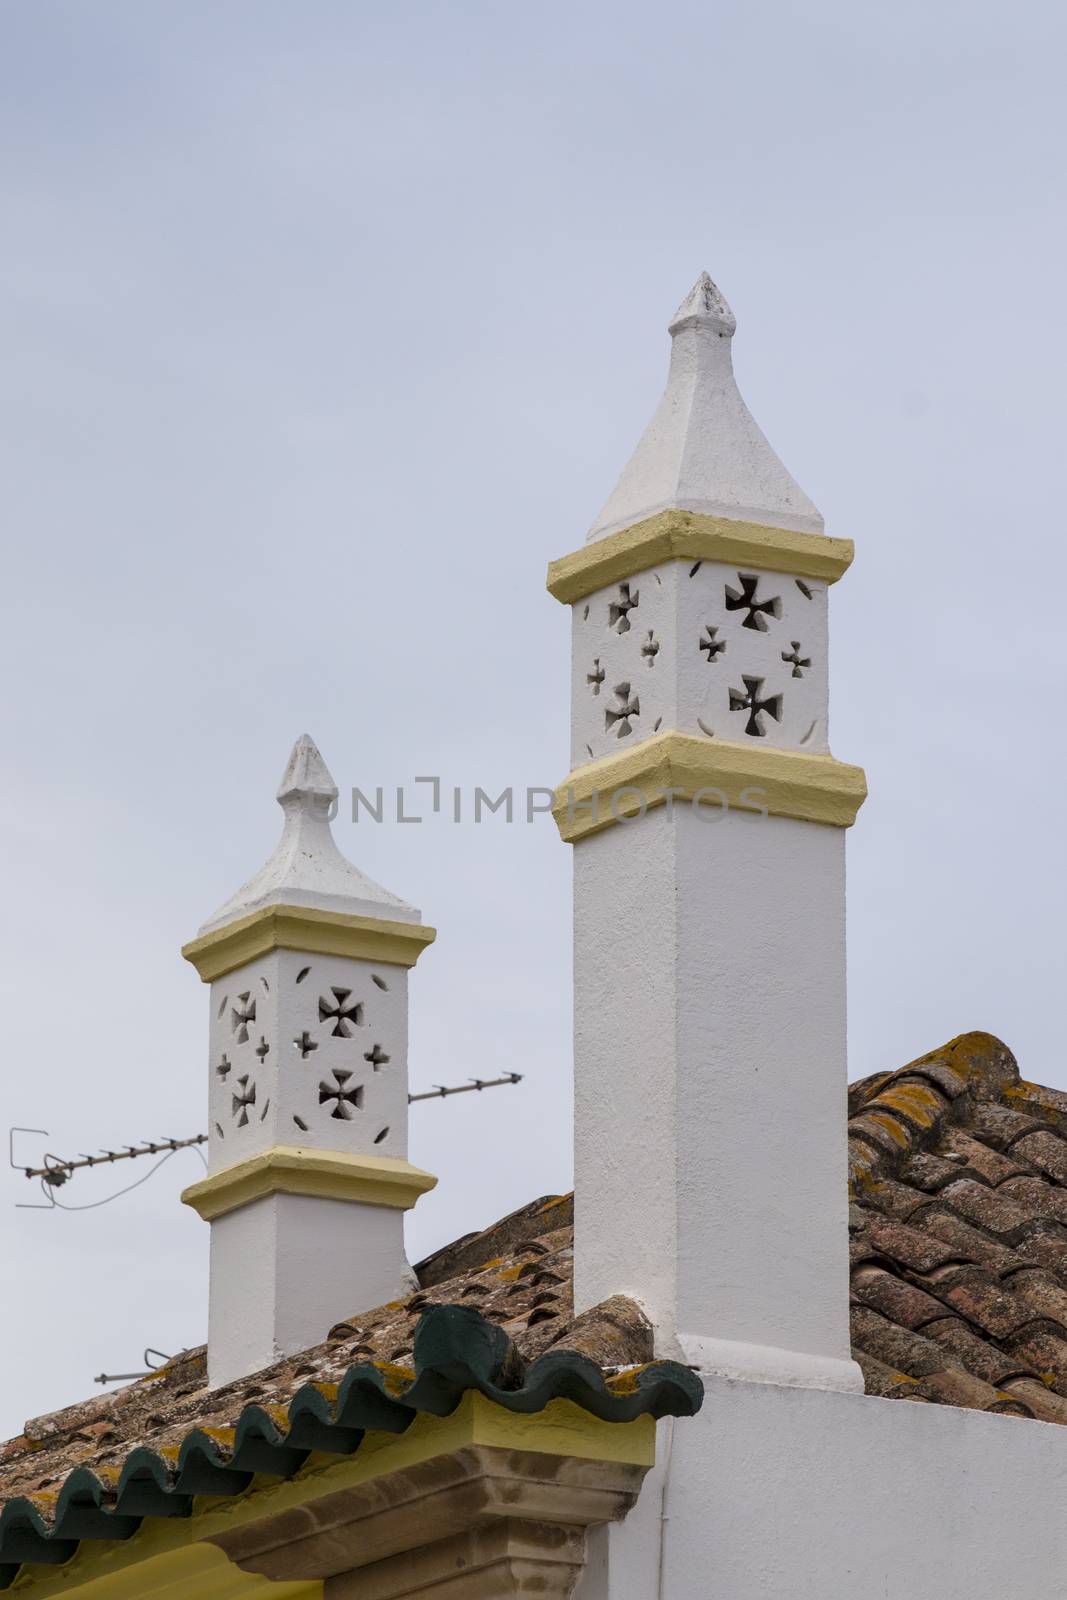 Typical chimneys on brown tile roofs in Portuguese architecture.